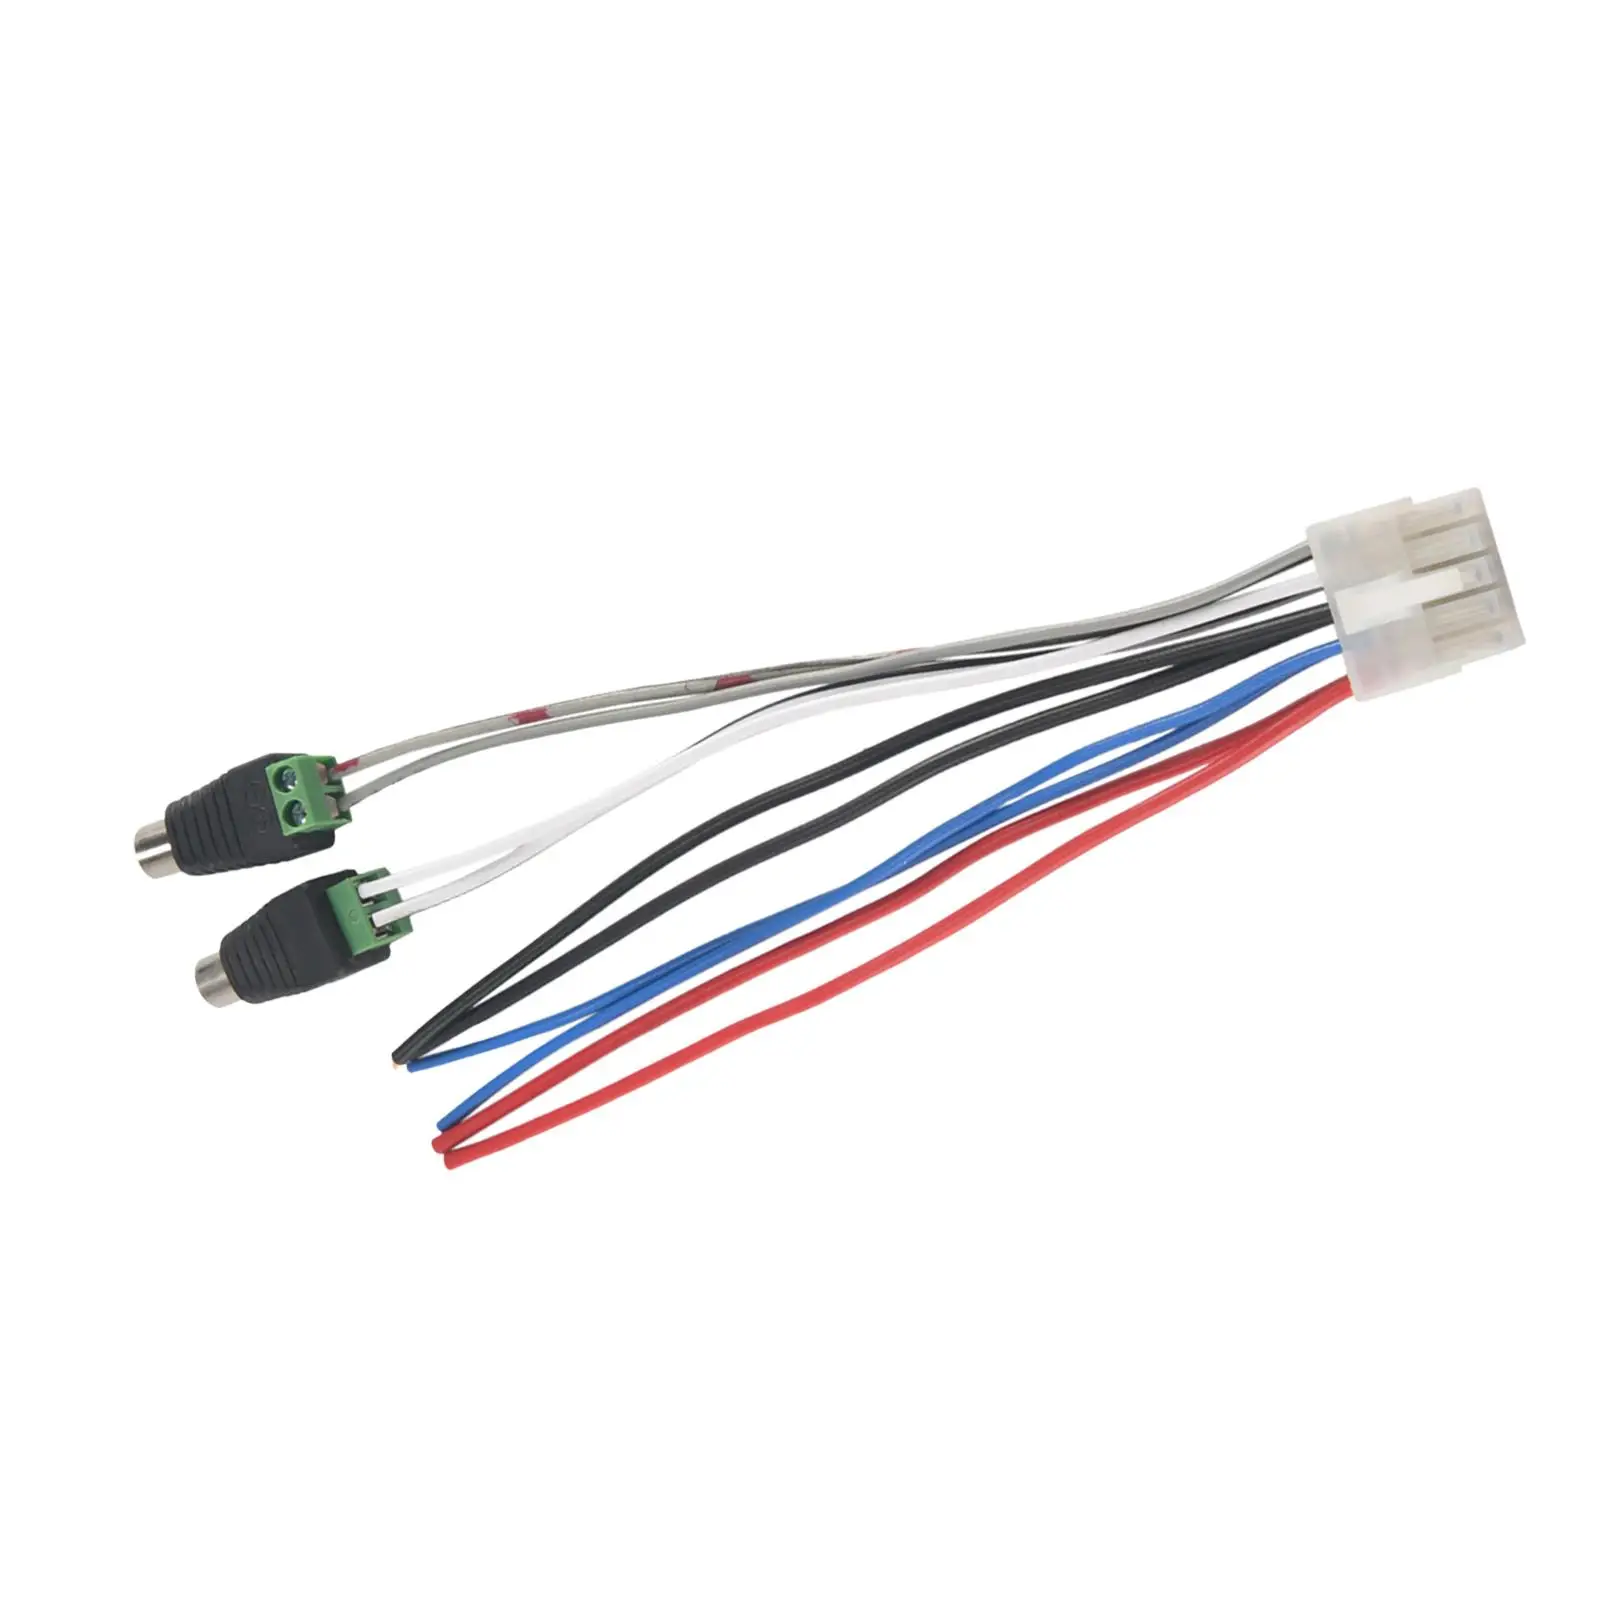 Universal Power Input Speaker Wire Harness Replacement 10 Pin Plug RCA Connector 15cm for Dual Tbx10A Amplifier